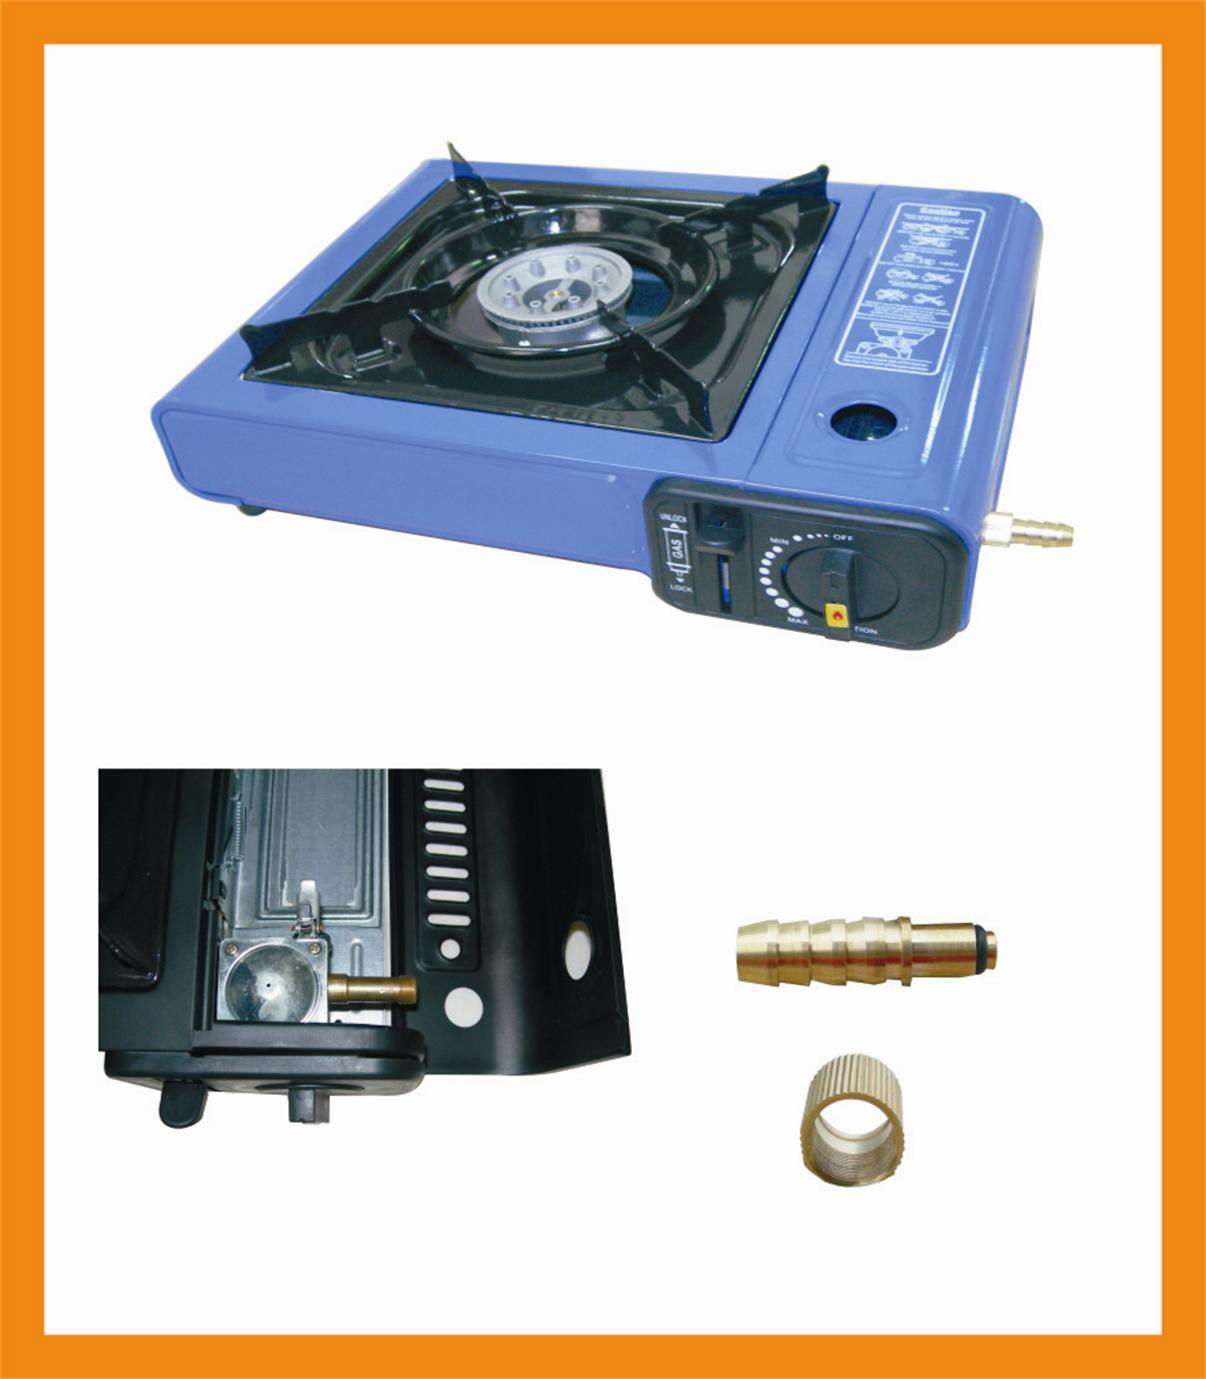 camping gas cooker protable gas heater